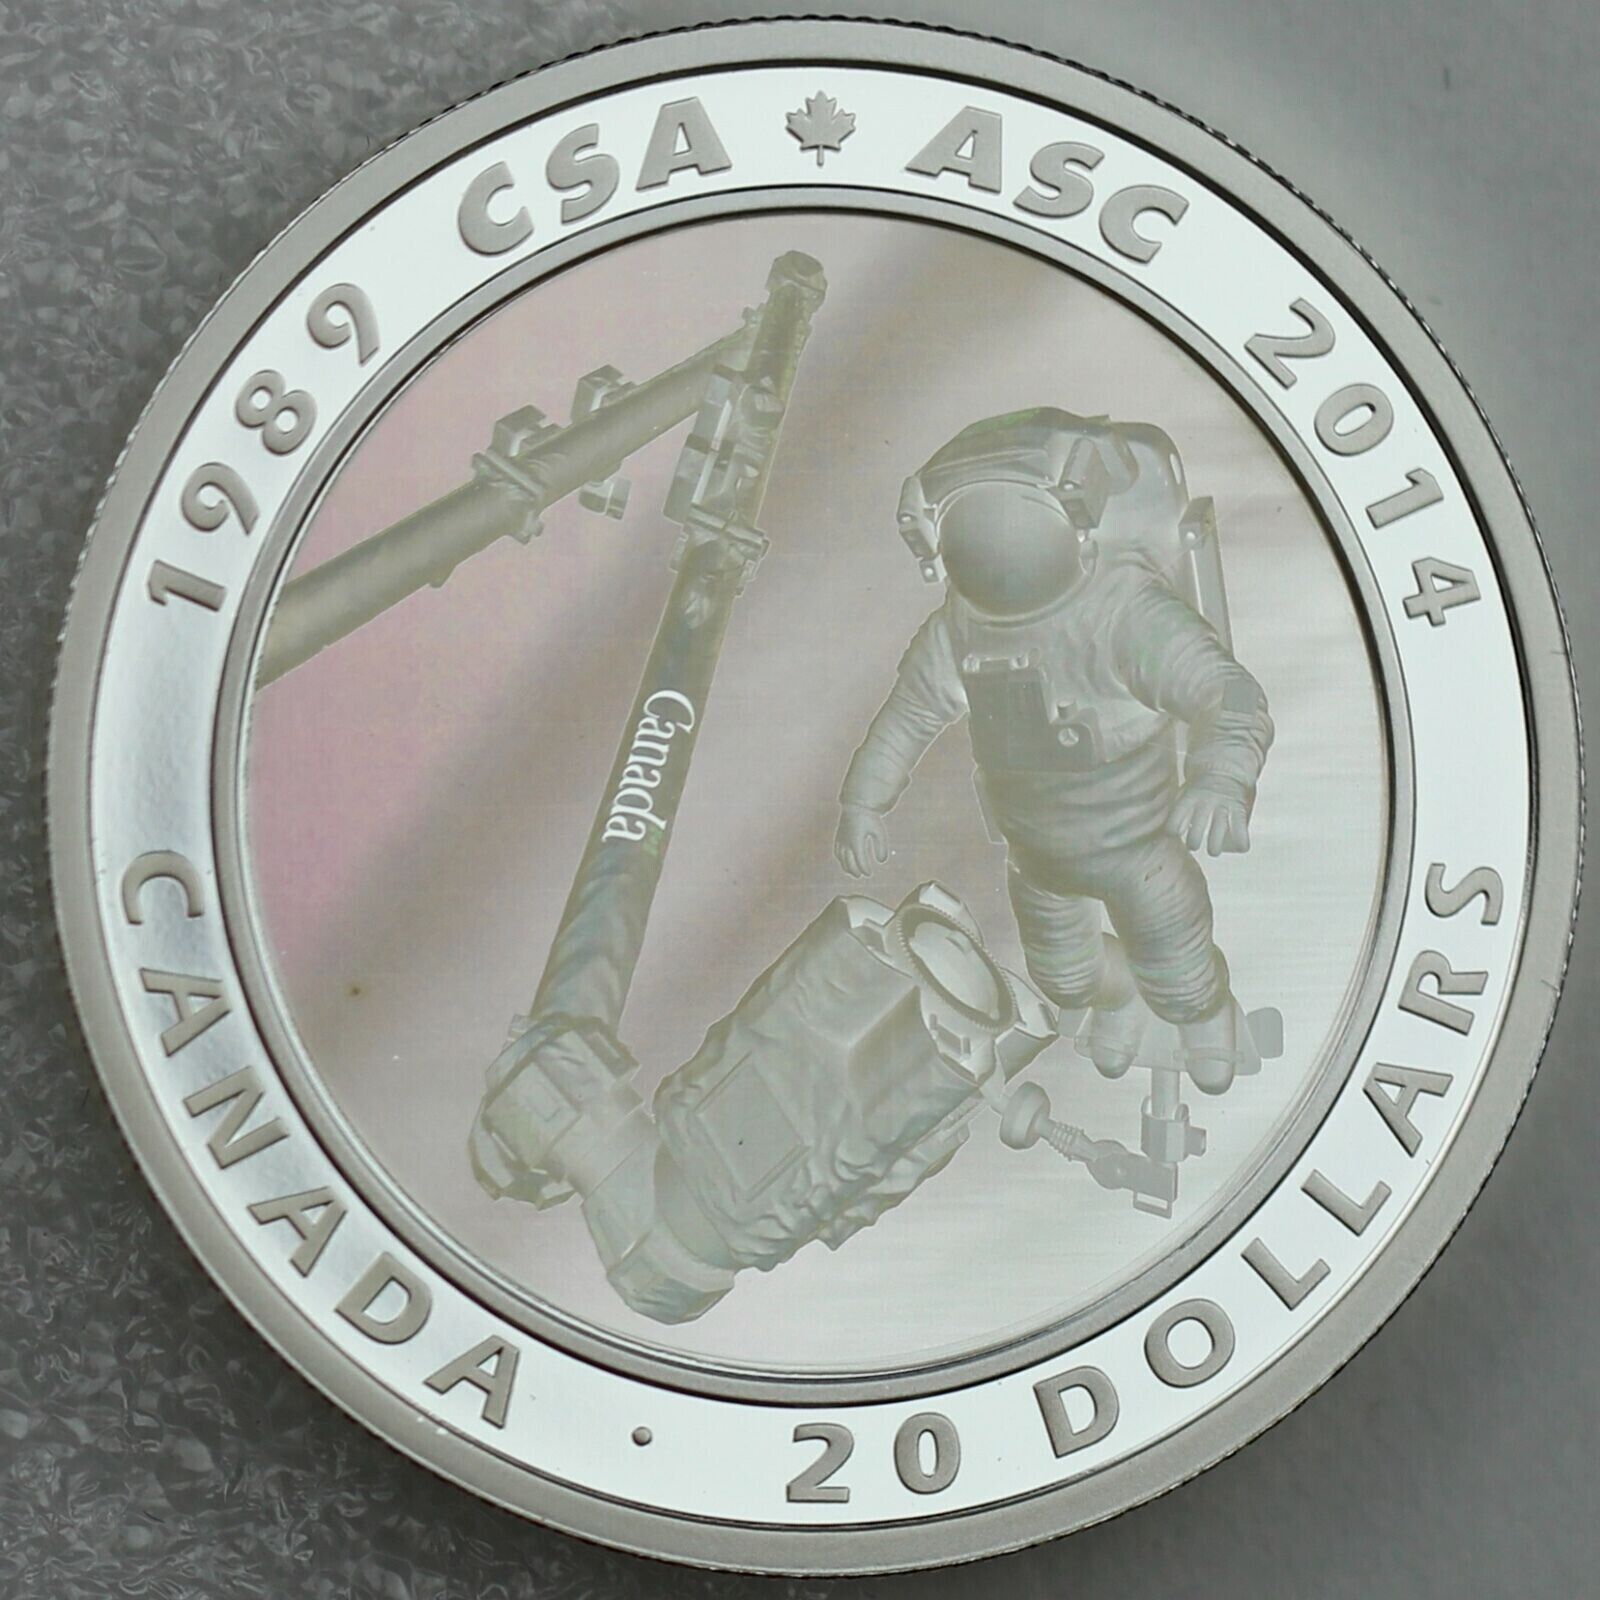 1 Oz Silver Coin 2014 $20 Canada 25th Anniversary Canadian Space Agency Hologram-classypw.com-4